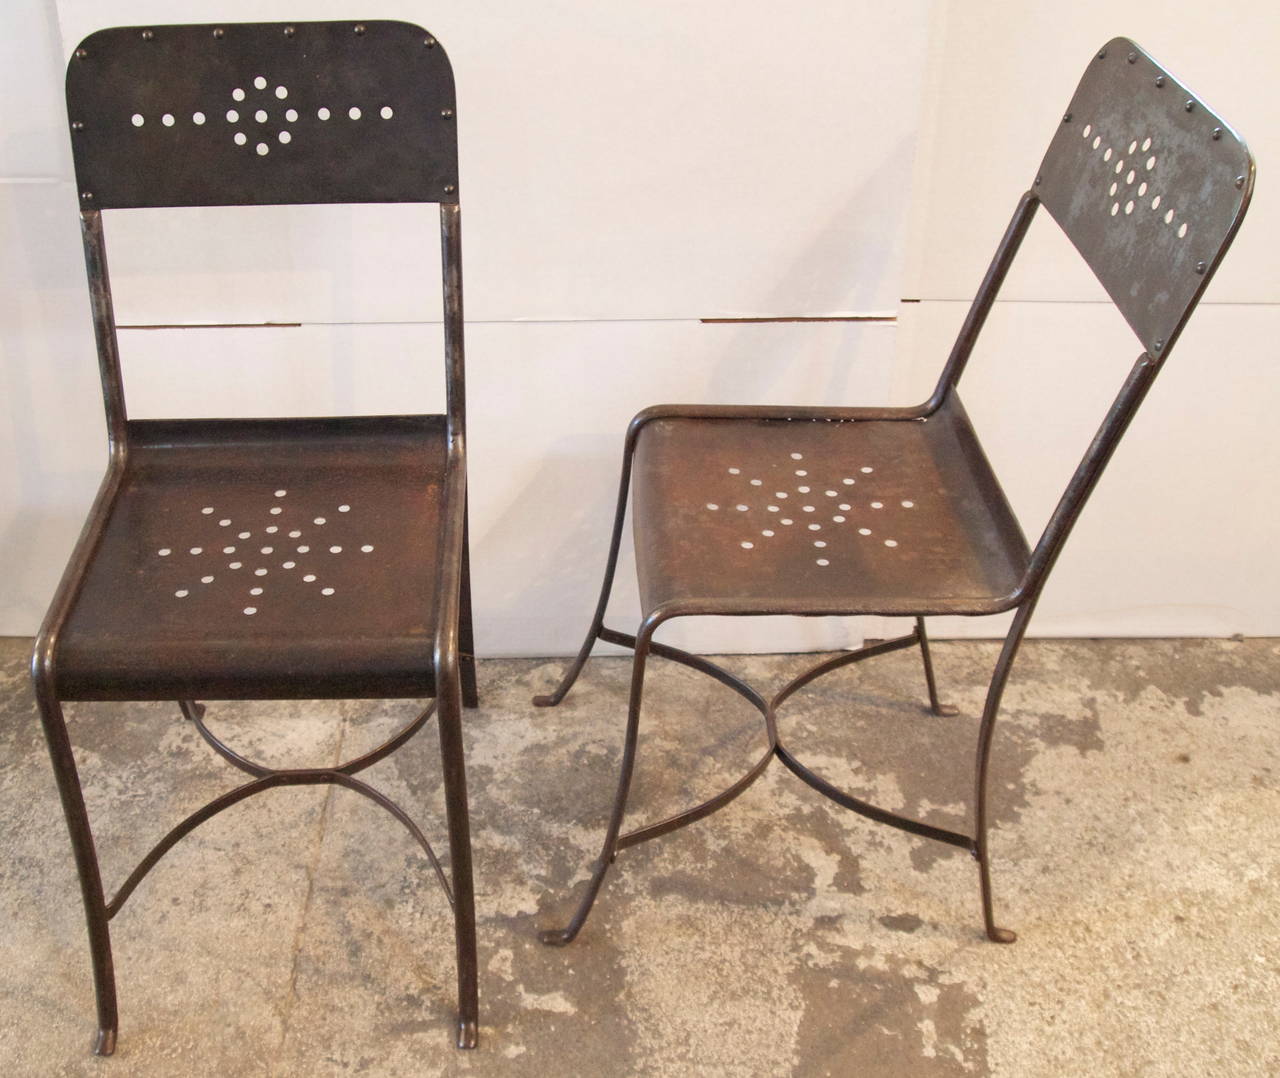 Wonderful pair of French industrial metal garden side chairs from the early 20th C. with beautiful patina